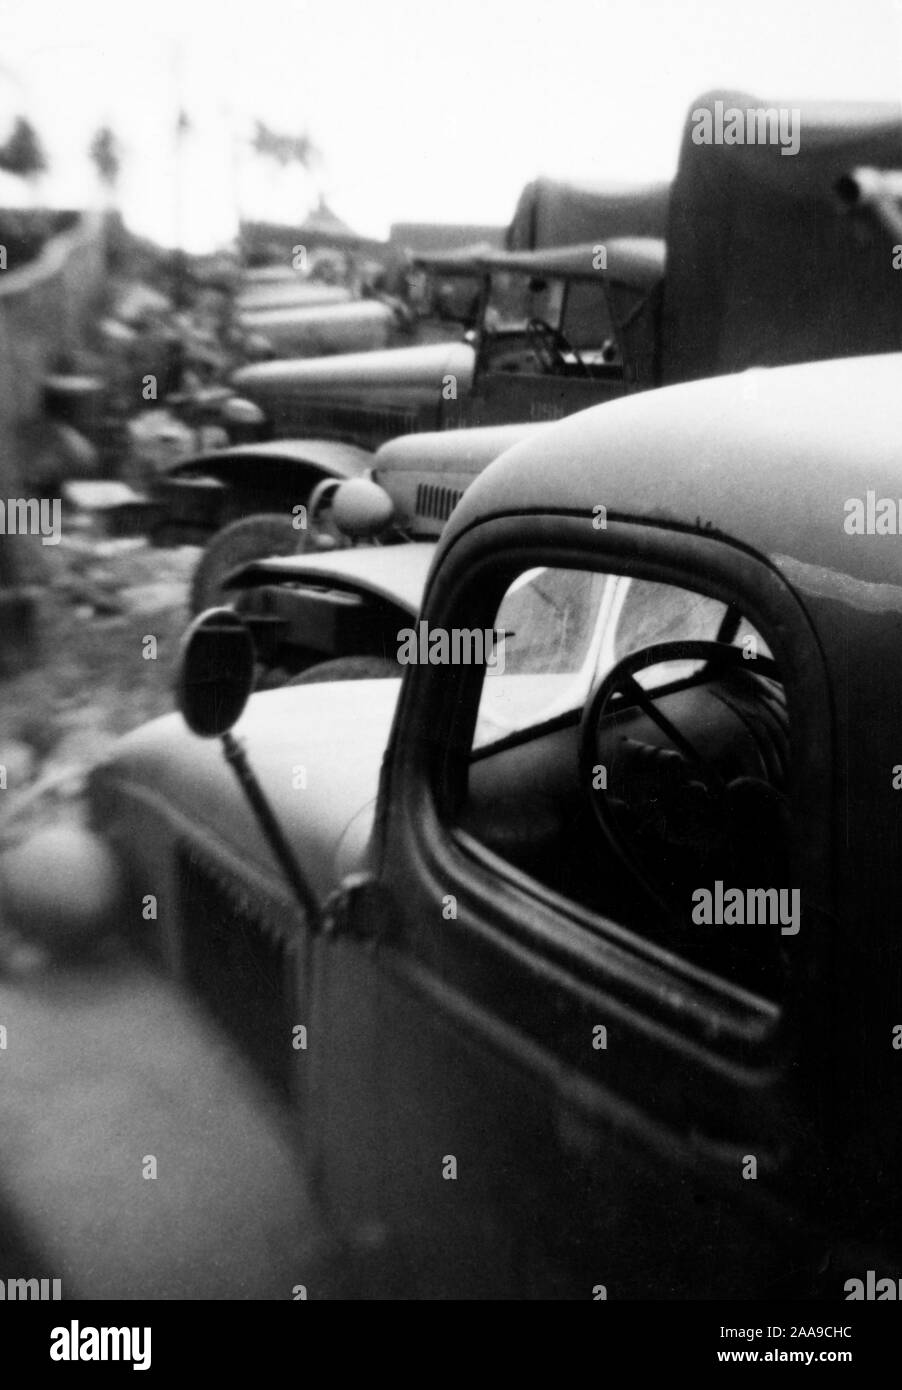 Supply vehicles are lined up at a Navy base in Guam, ca. 1944. Stock Photo